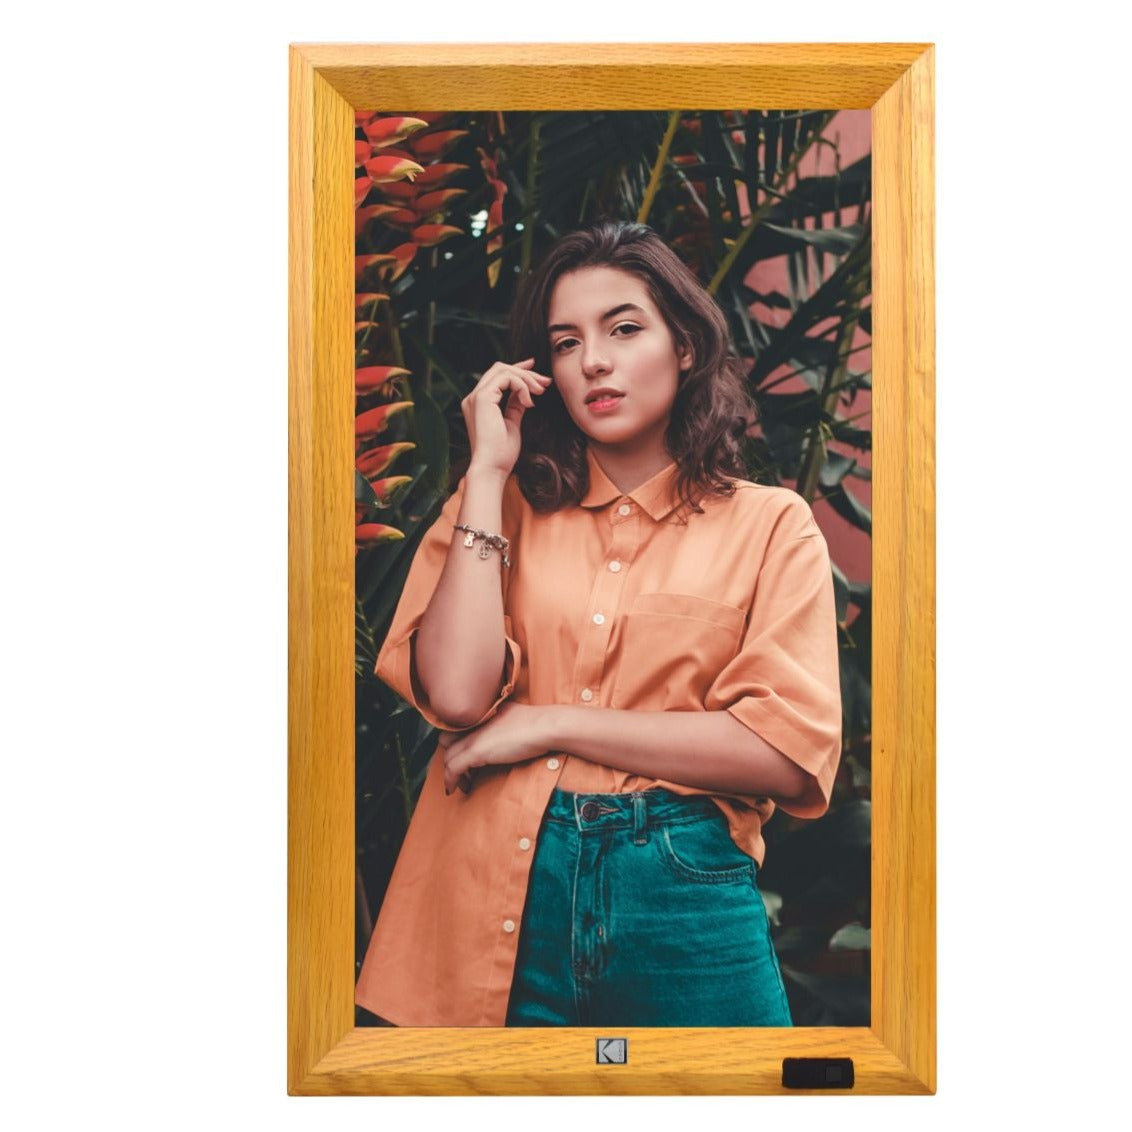 Kodak 17" Wi-Fi Enabled Wall Photo Frame in Burlywood front perspective